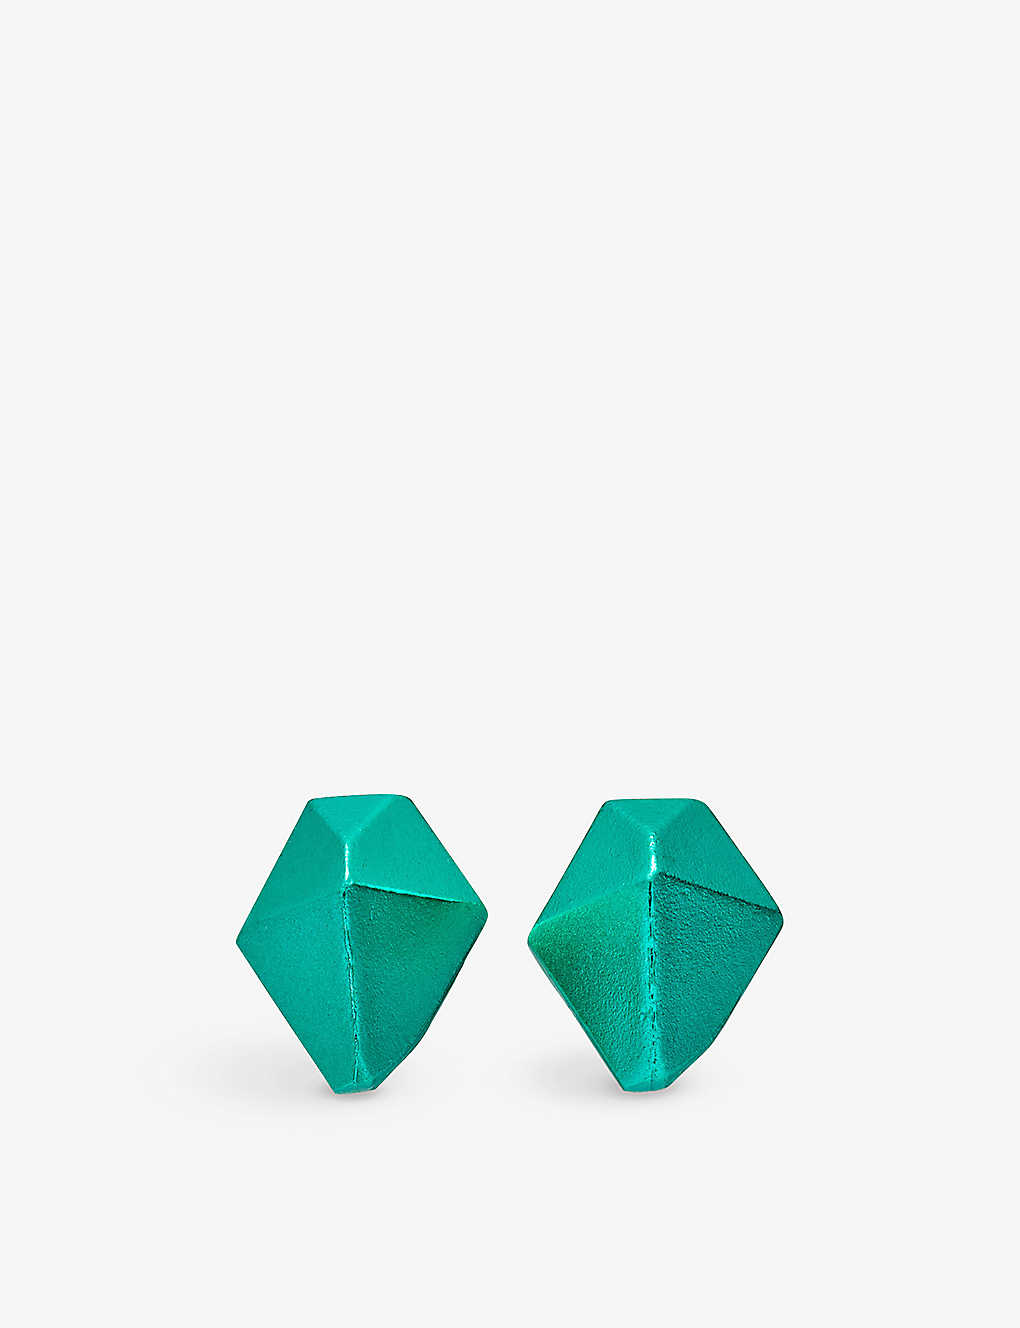 La Maison Couture The Rock Hound Hotrocks Recycled Sterling-silver Stud Earrings In Green